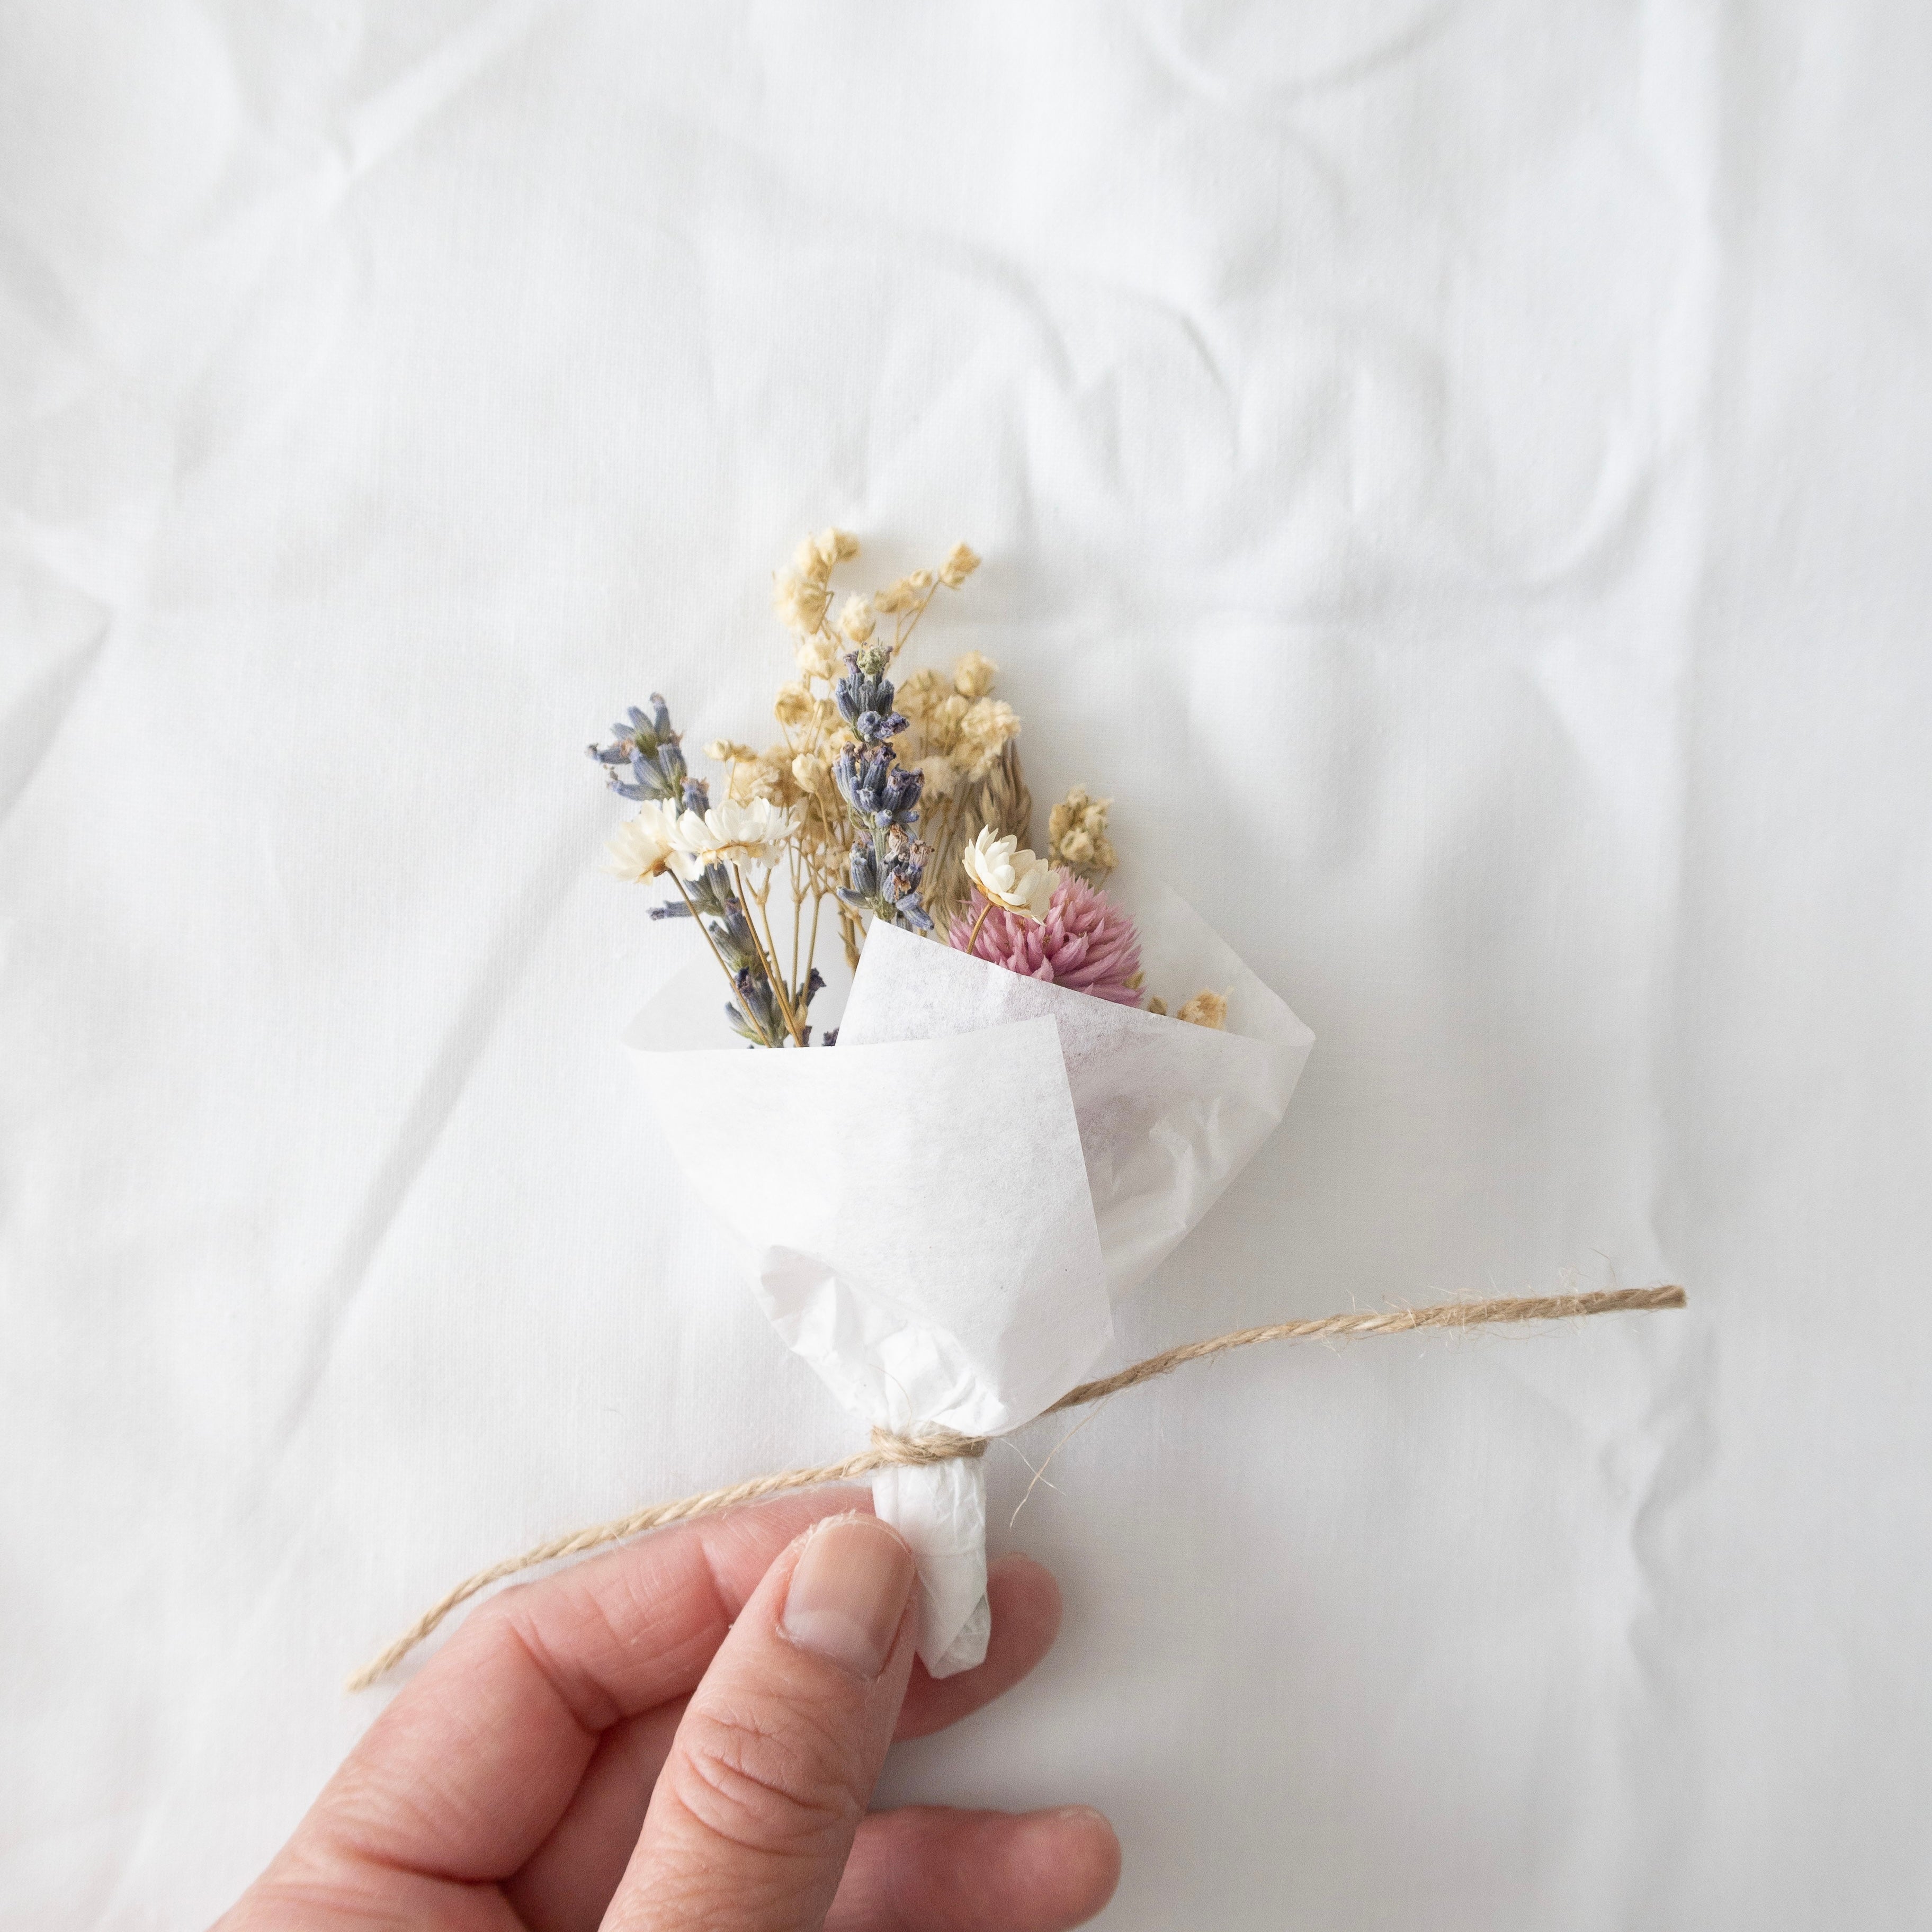 How To Make Mini Dried Flower Bouquets